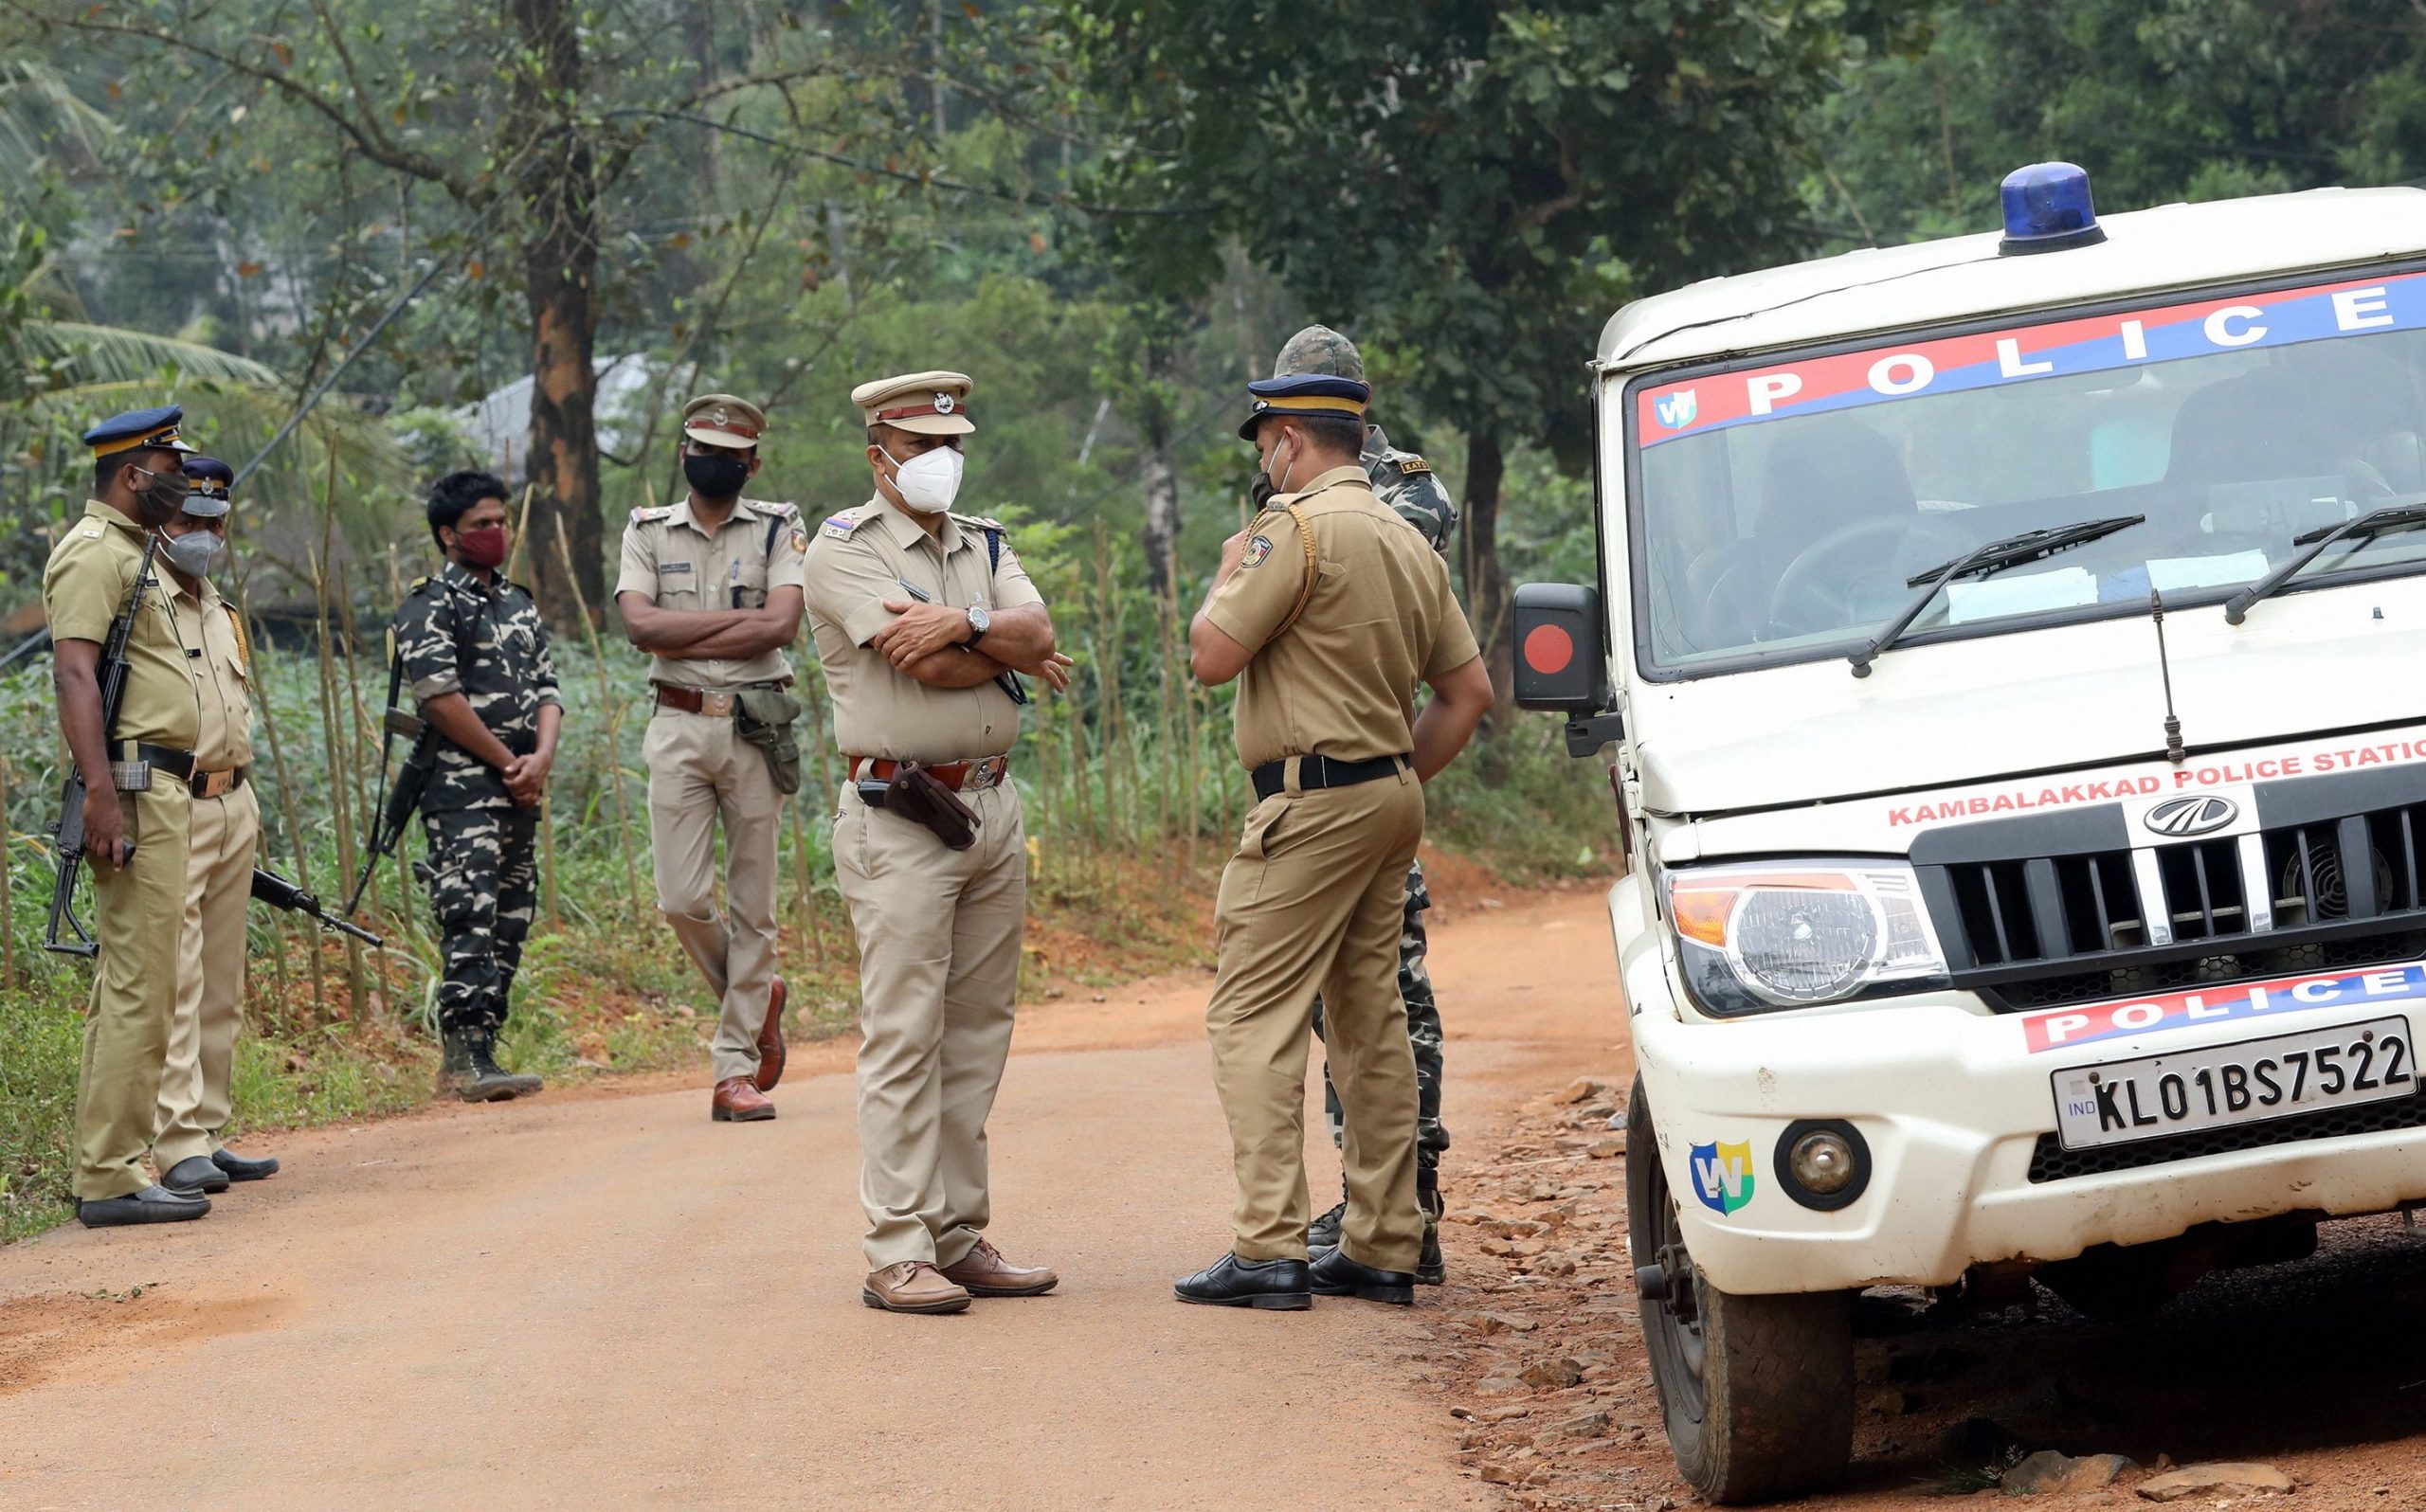 400 Maoists ambushed 22 security personnel in Chhattisgarh: Report